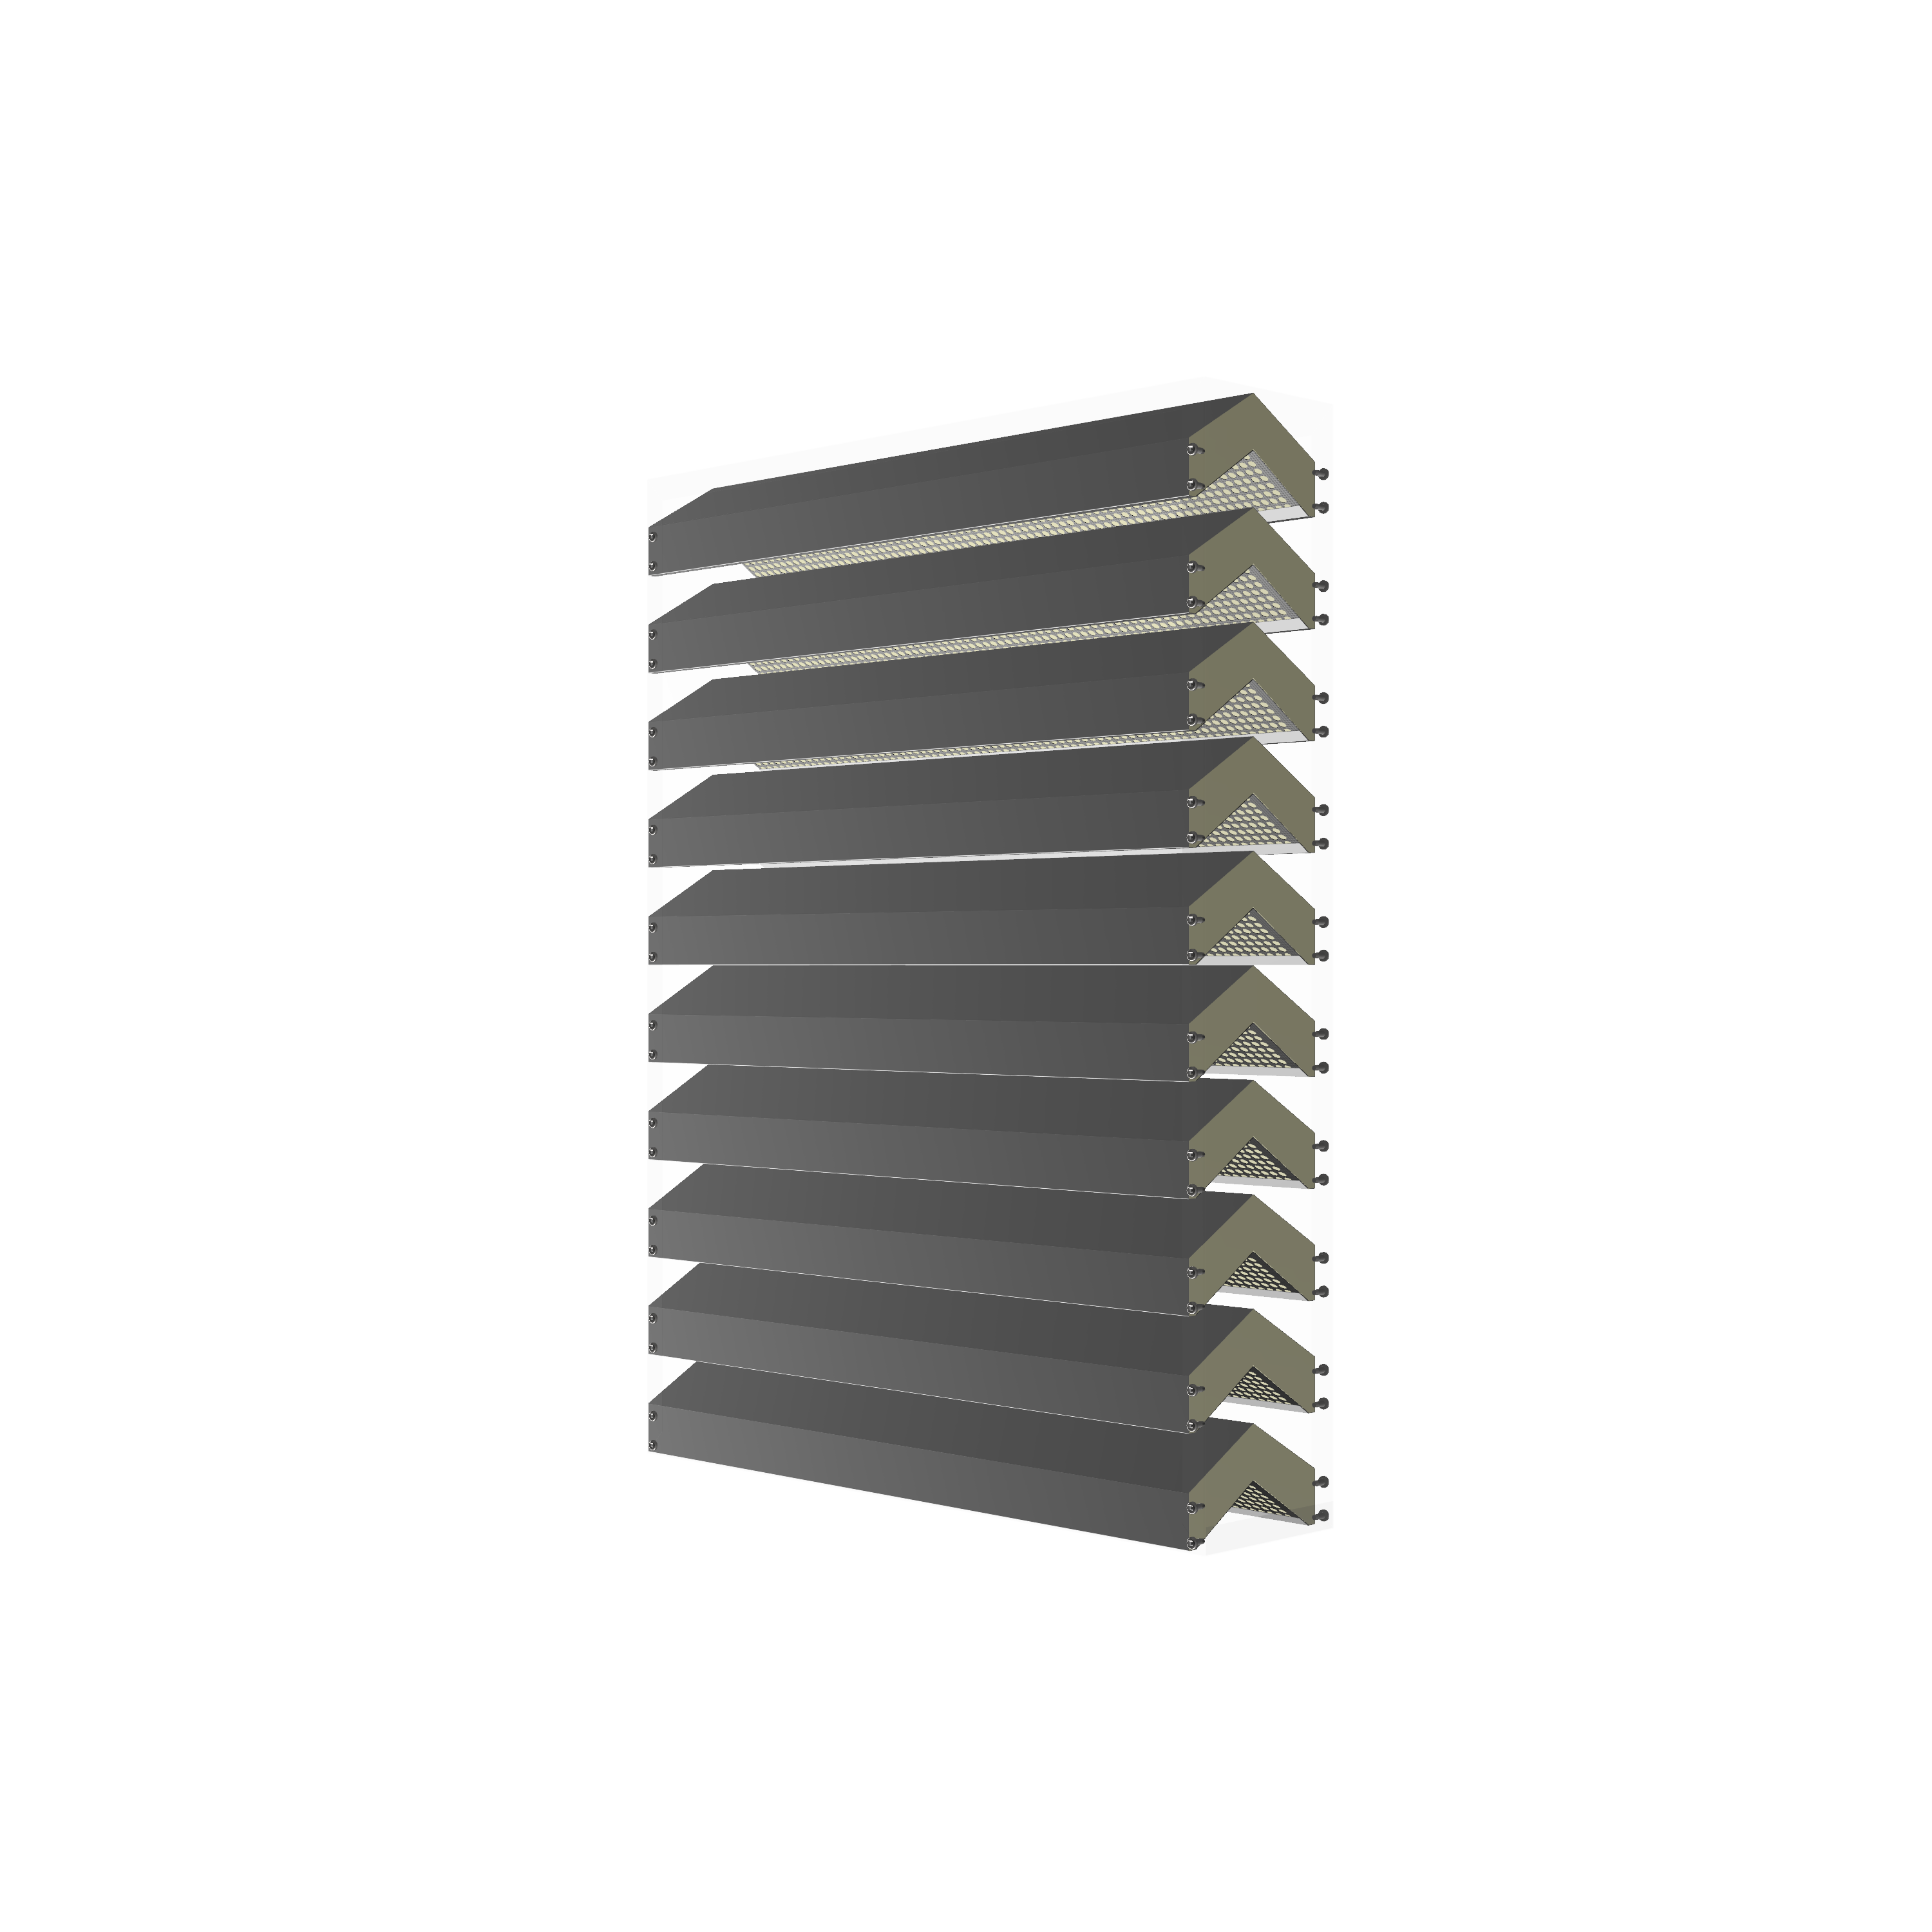 https://starduct.vn/storage/2022/08/21/Acoustic Louver.png